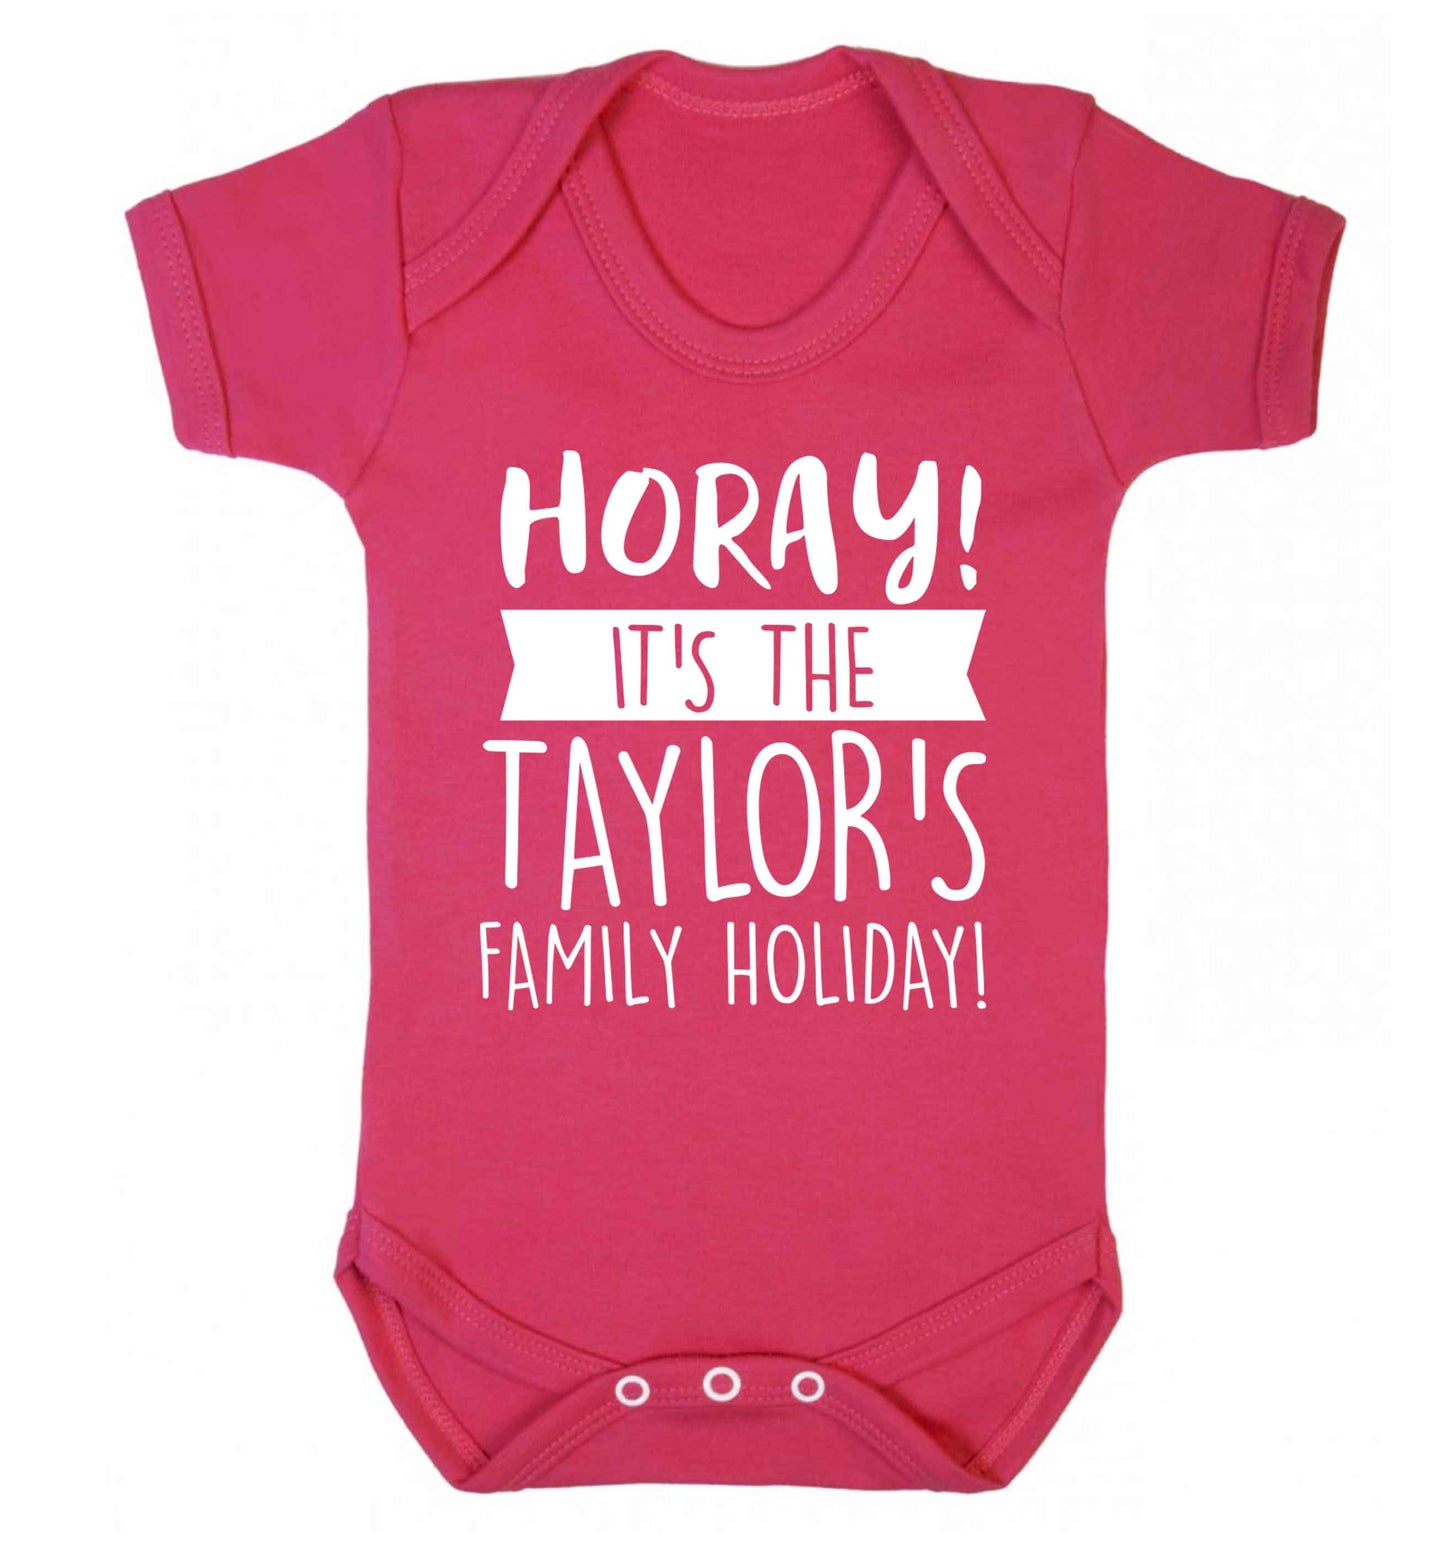 Horay it's the Taylor's family holiday! personalised item Baby Vest dark pink 18-24 months